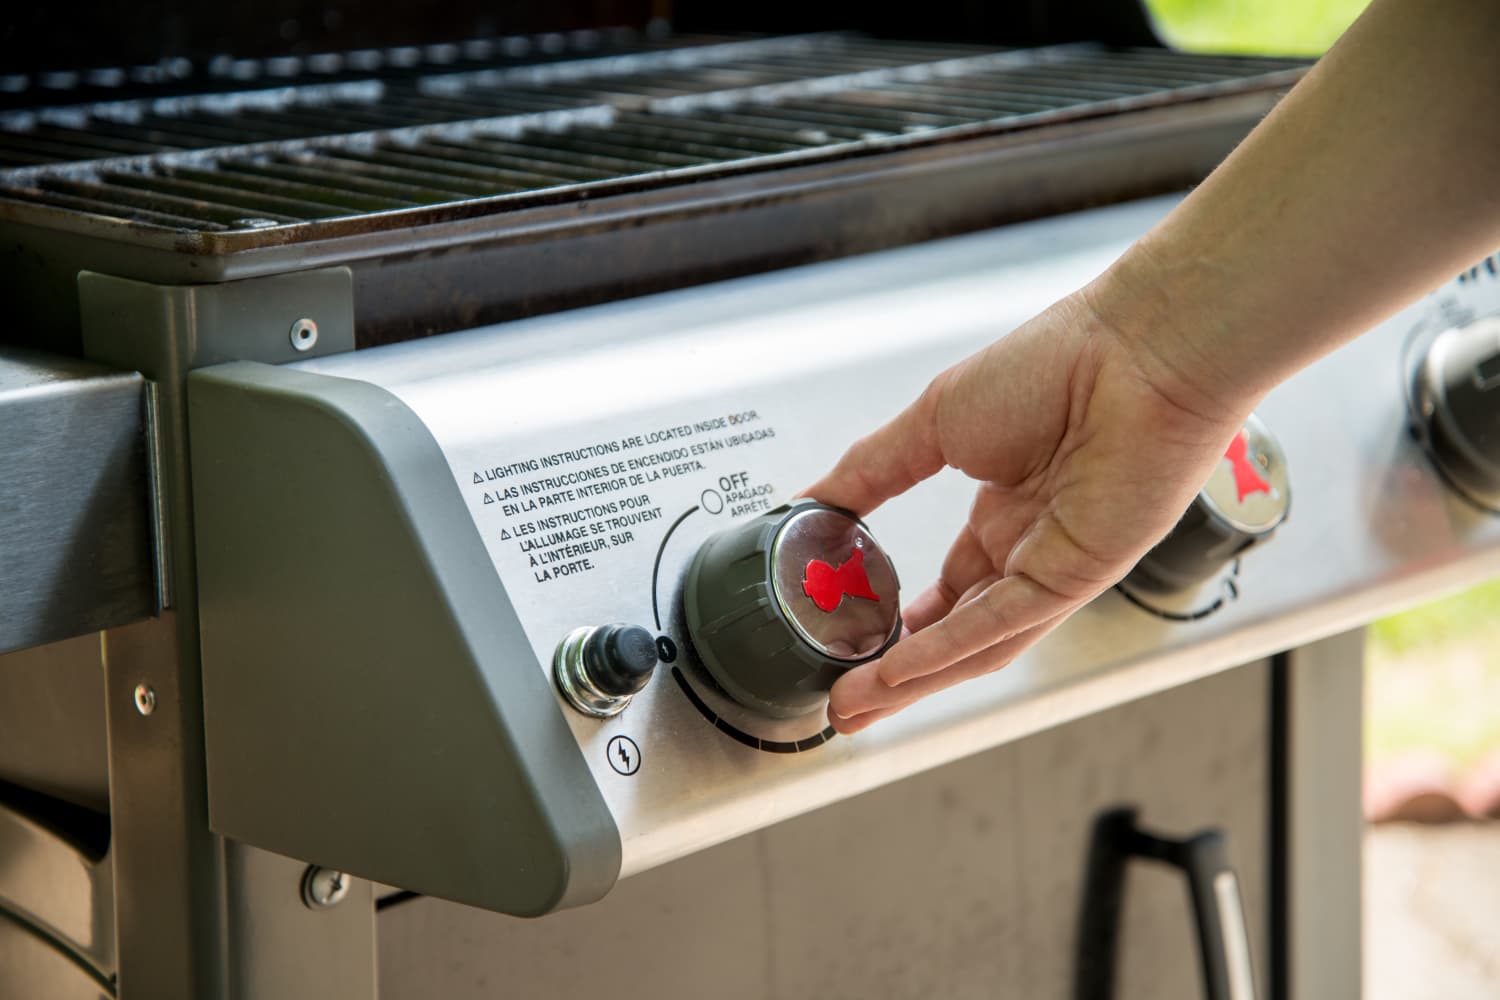 How To Preheat A Grill How Long Do You Really Need to Preheat Your Grill | Kitchn